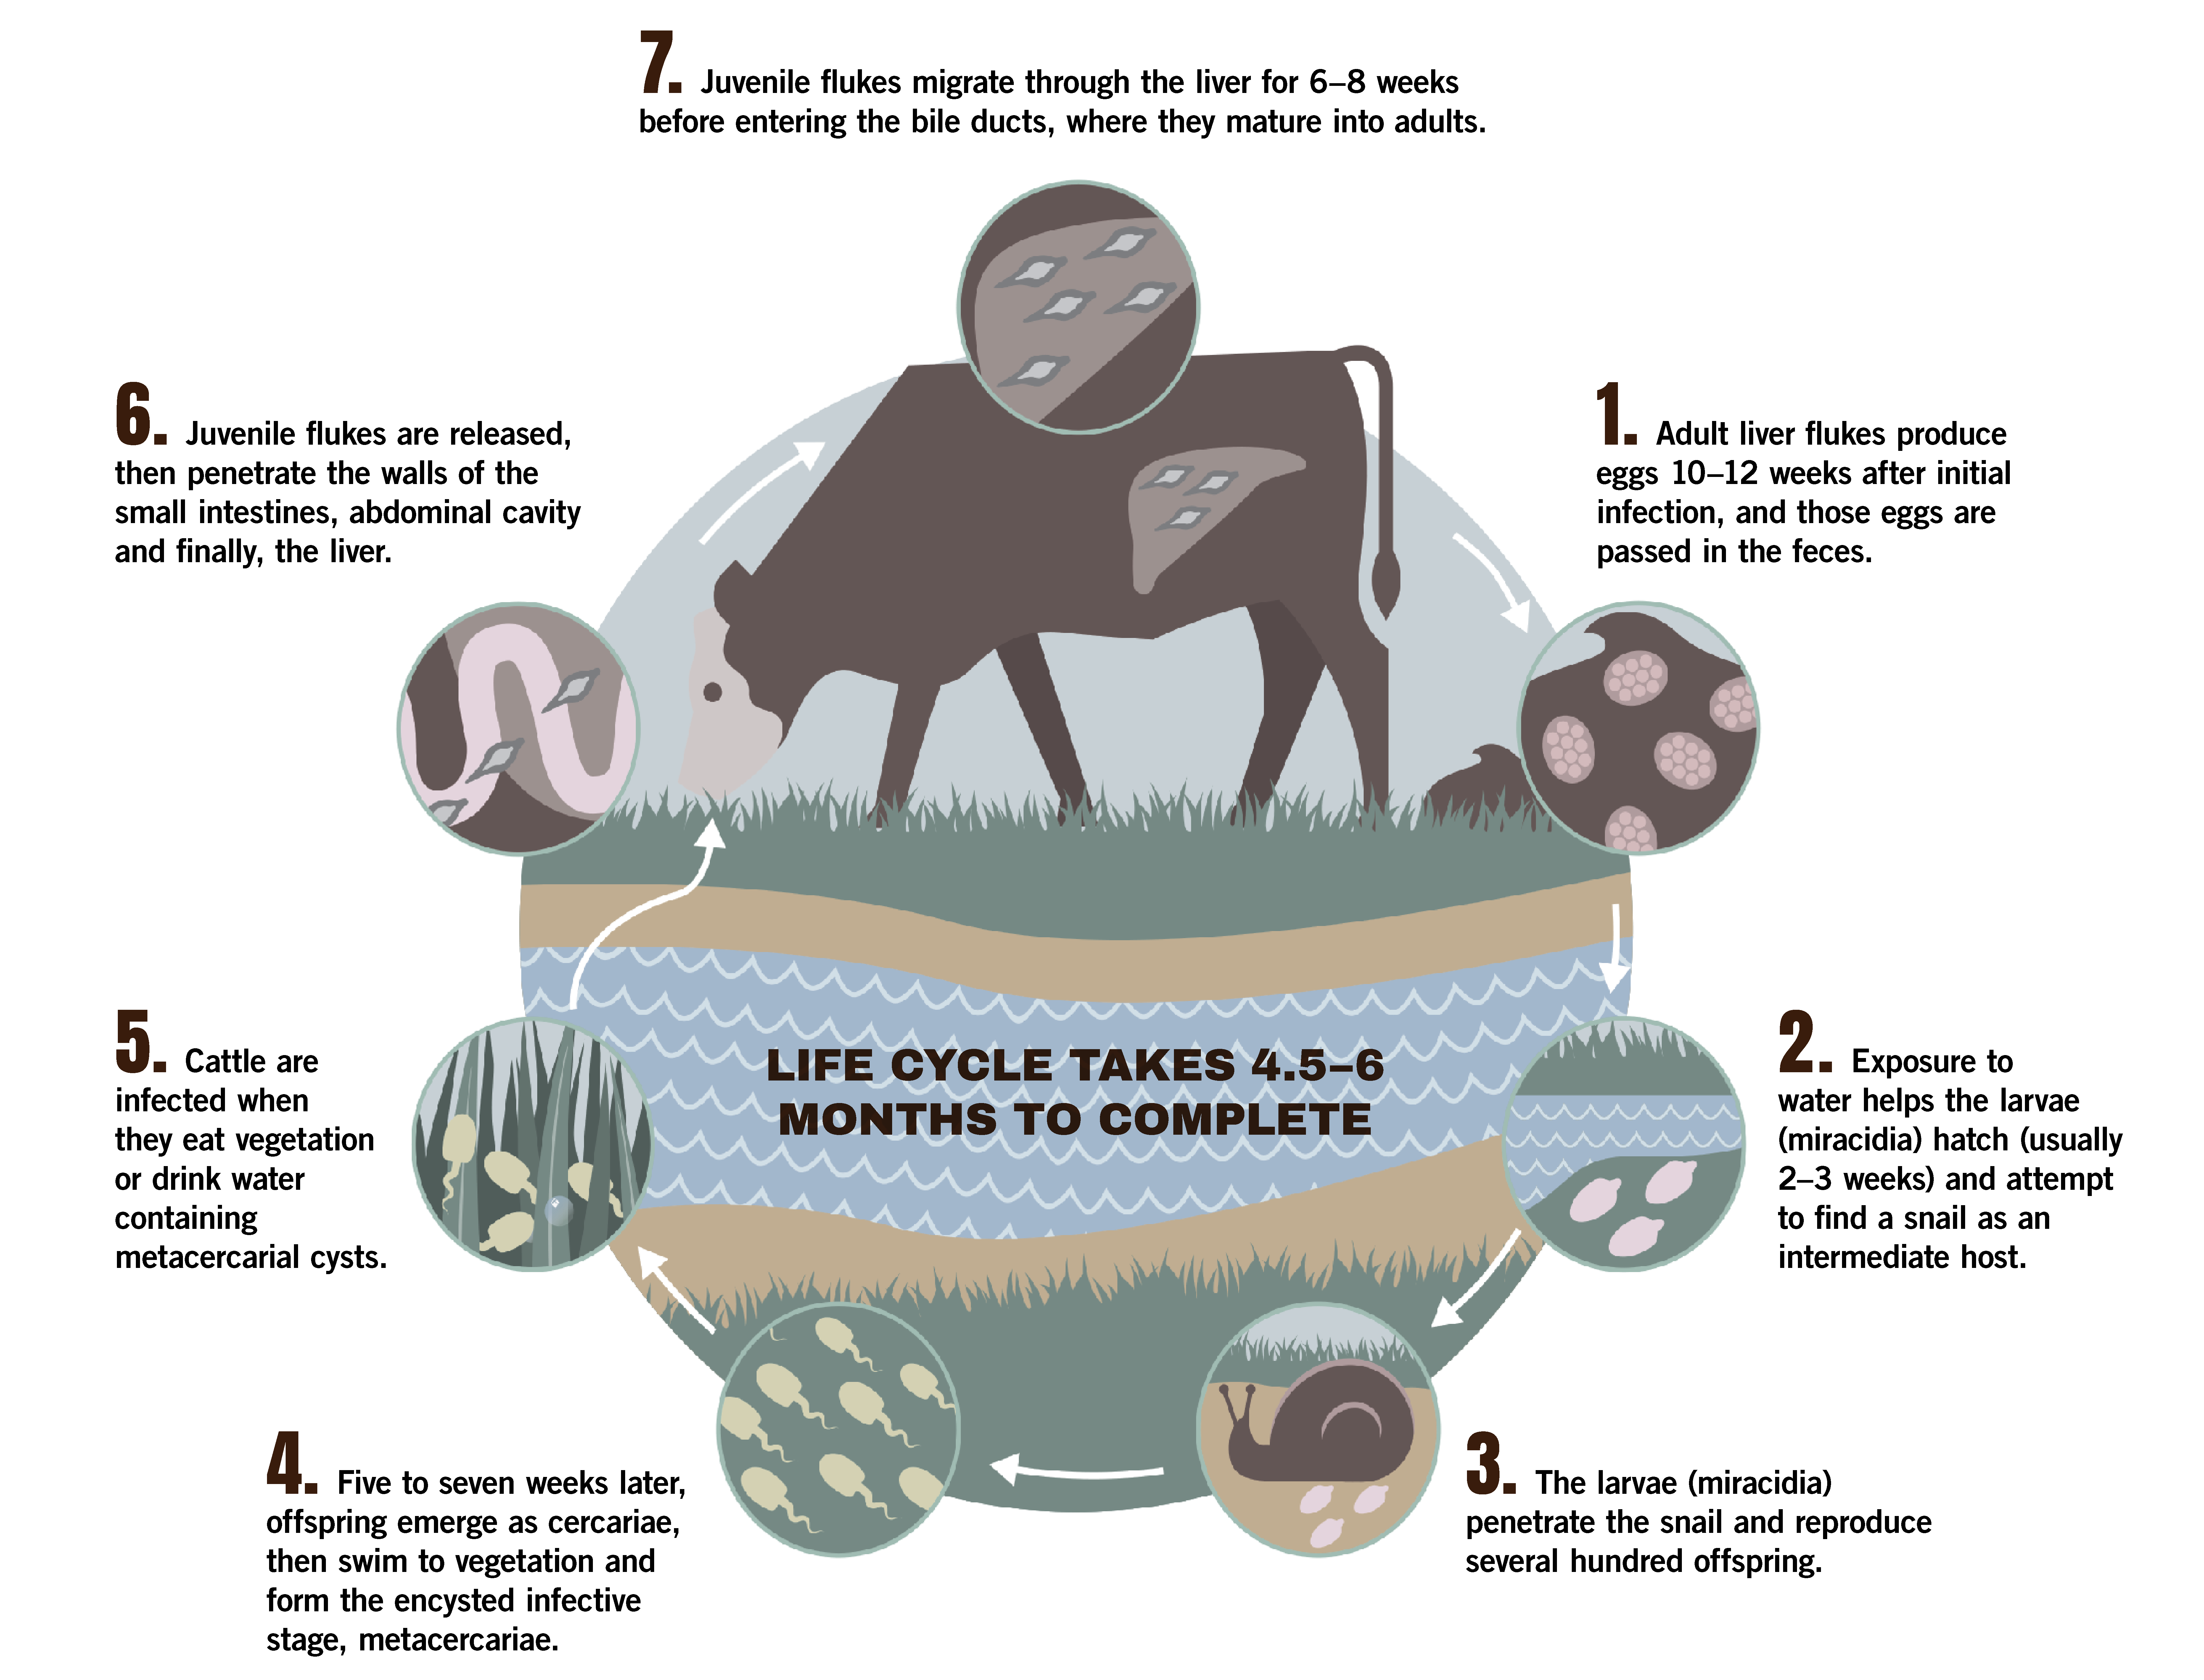 Life cycle of live flukes chart